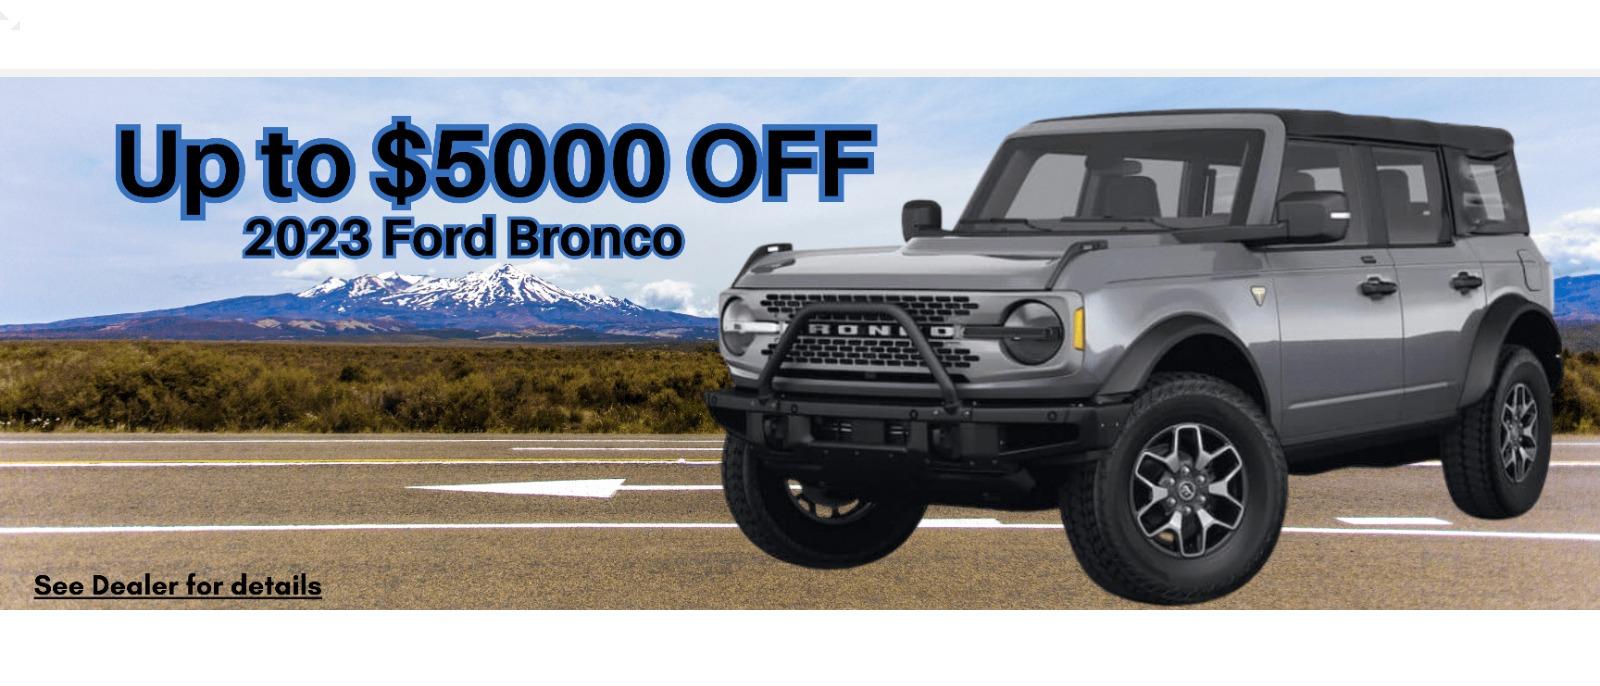 2023 FORD BRONCO
Up to $5000 off MSRP